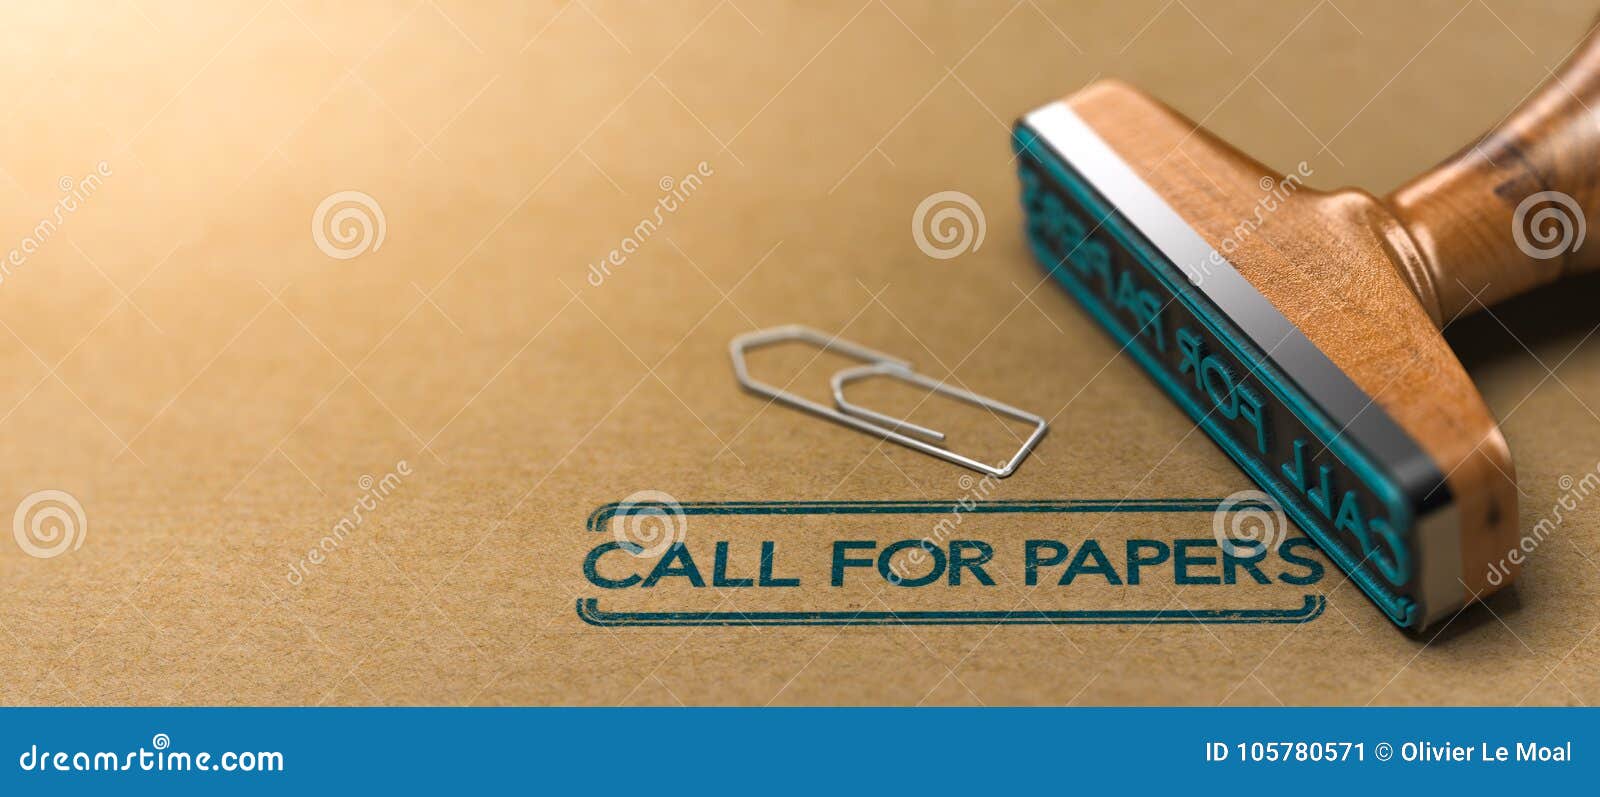 call for papers or abstracts for conference, workshop or meeting